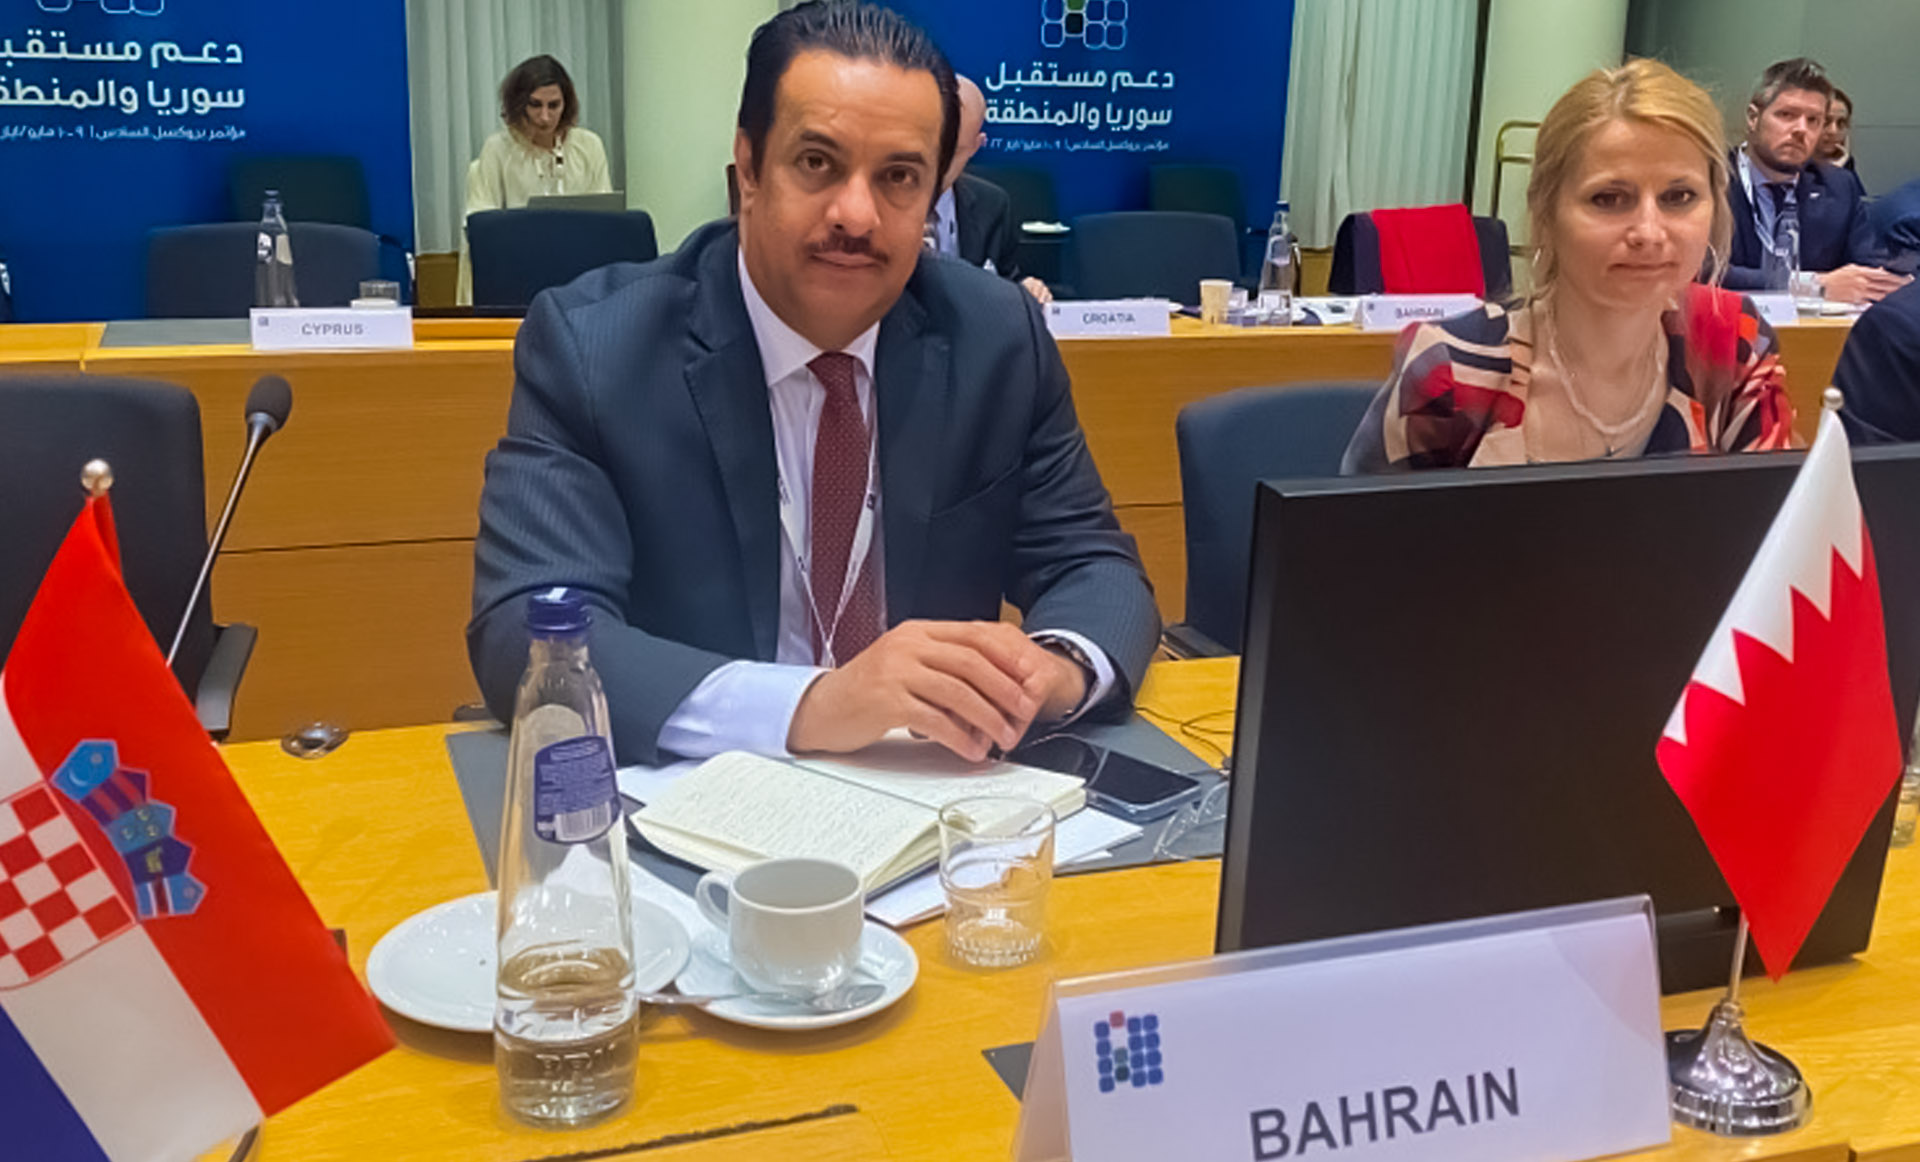 Bahrain participates in a conference on Syria and the region